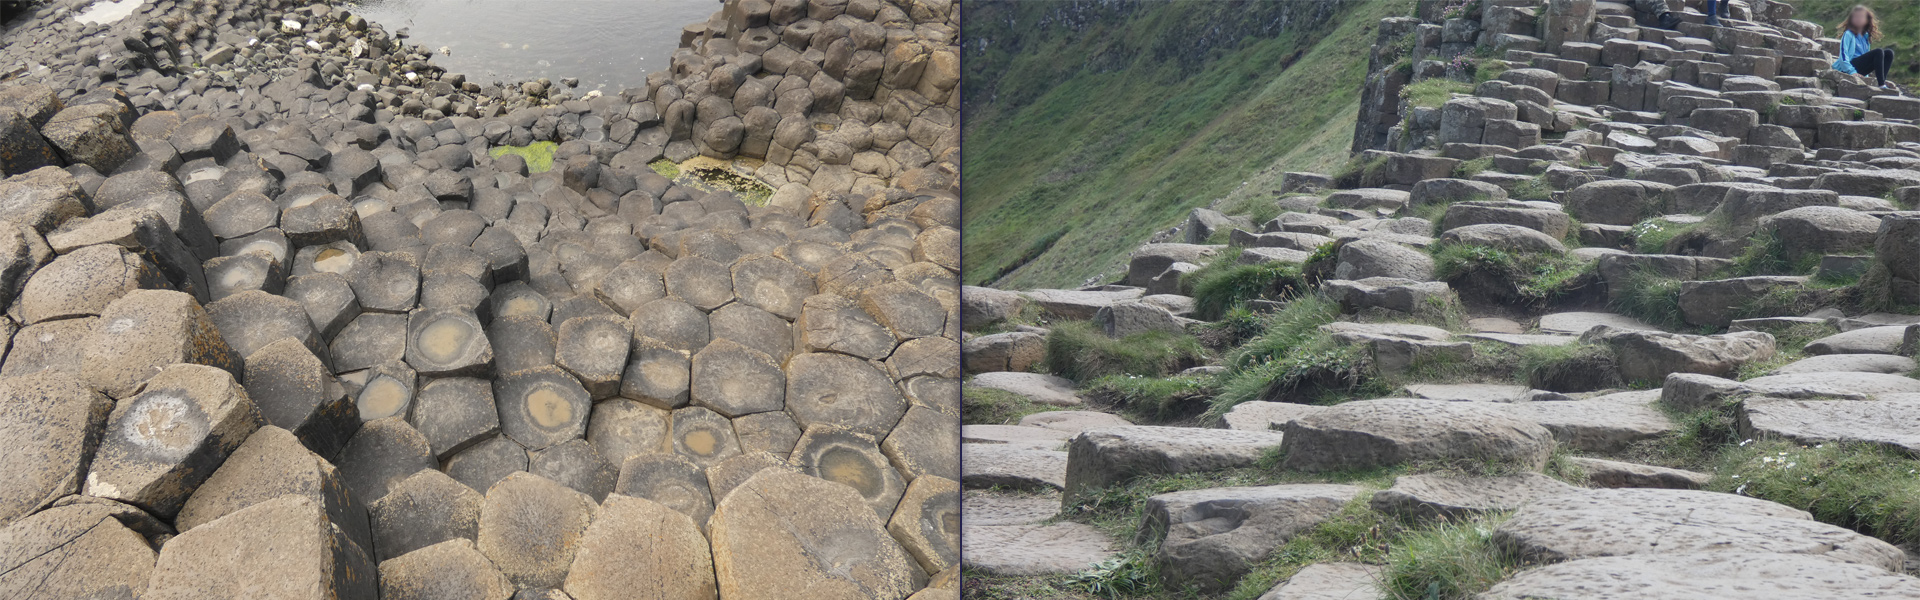 Two photos of the Giant's Causeway in Northern Ireland